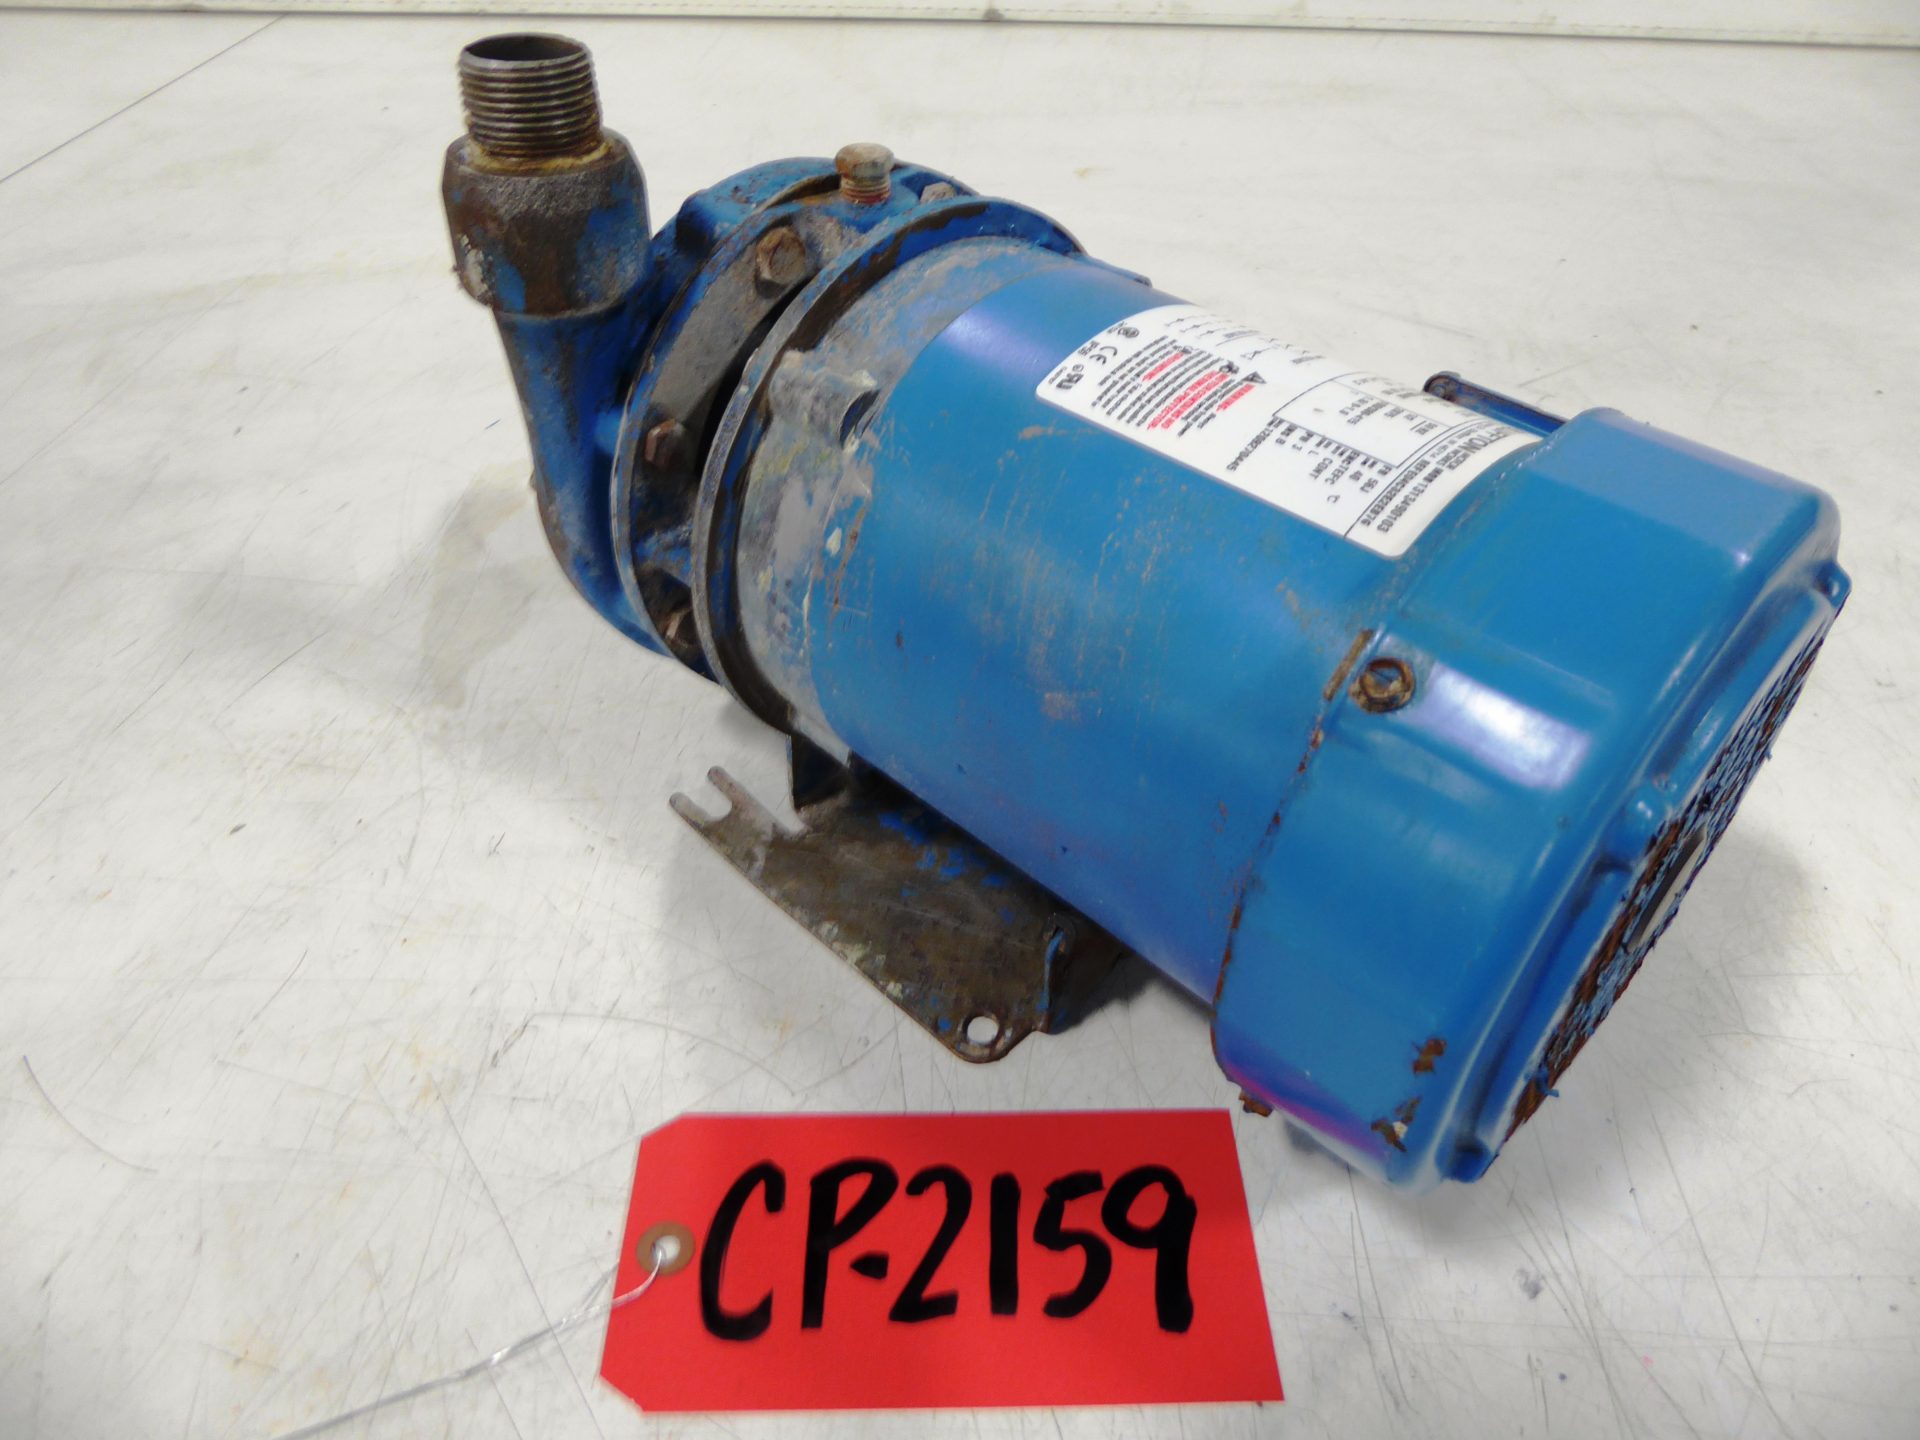 Used Centrifugal Pump - Goulds .5 HP 1.25" Inlet 1" Outlet Centrifugal Pump-Pumps - Centrifugal